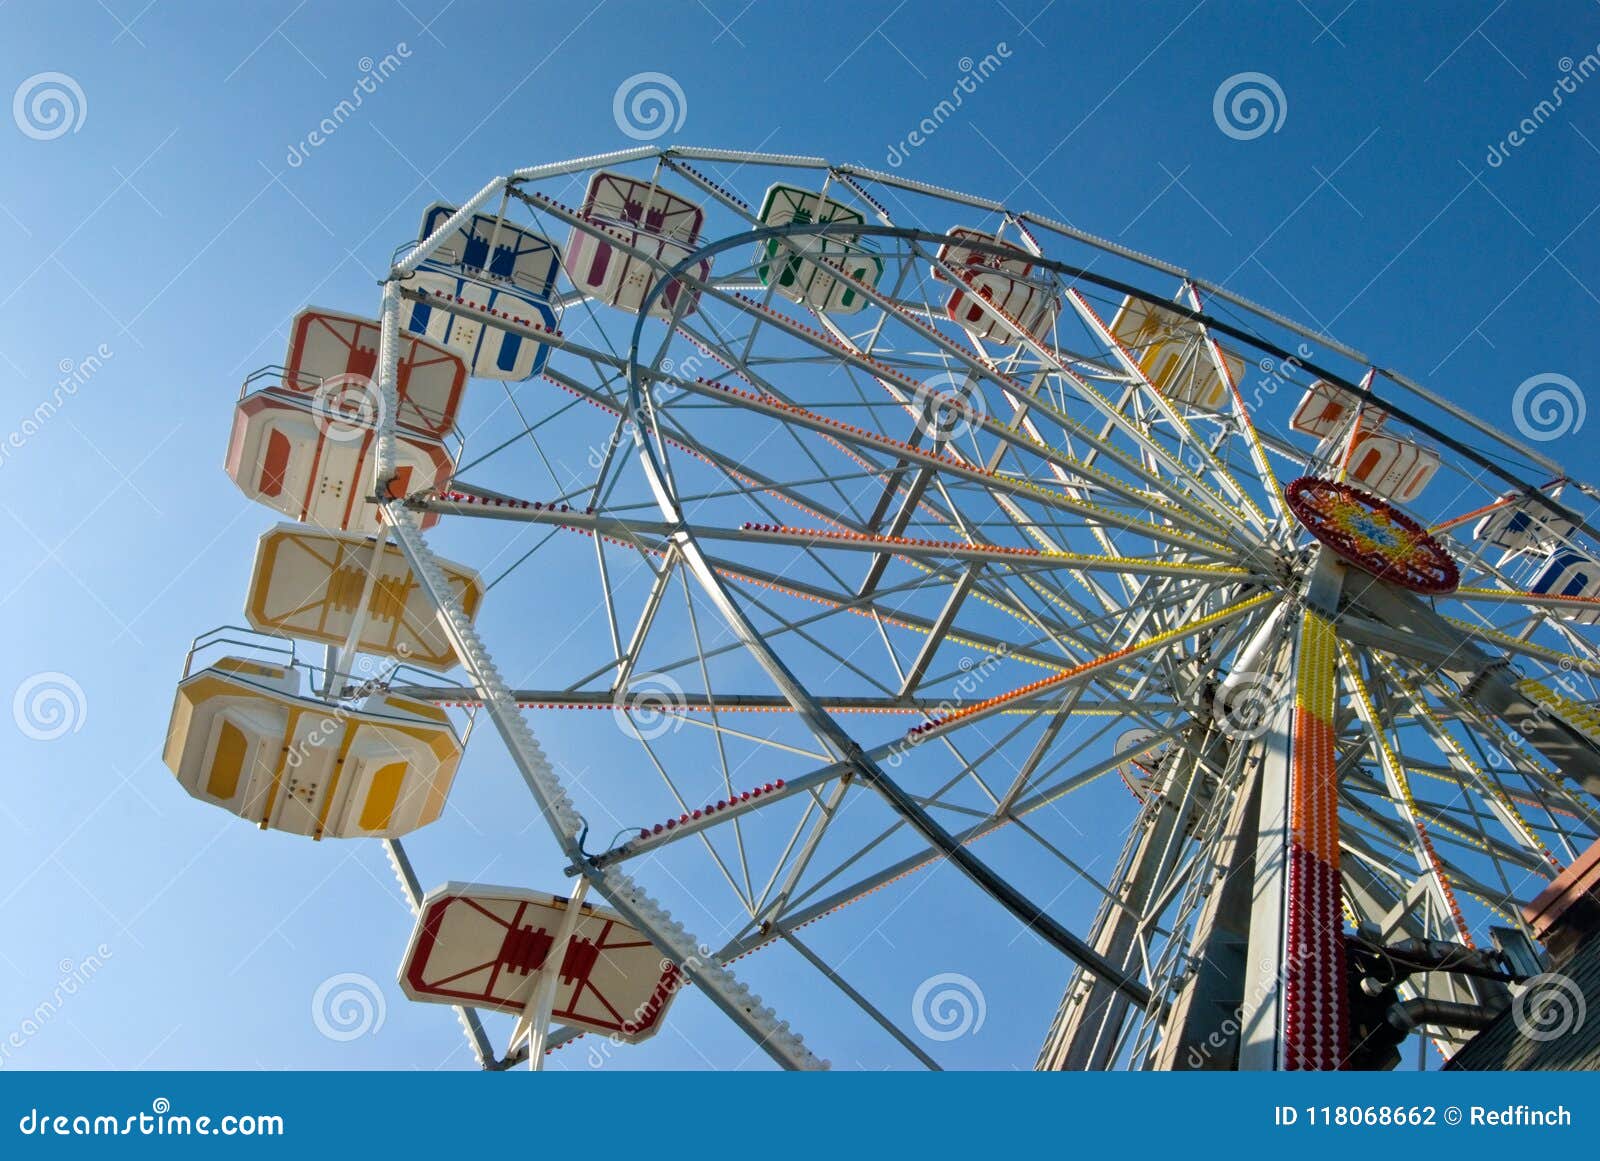 ferris wheel at the new jersey shore